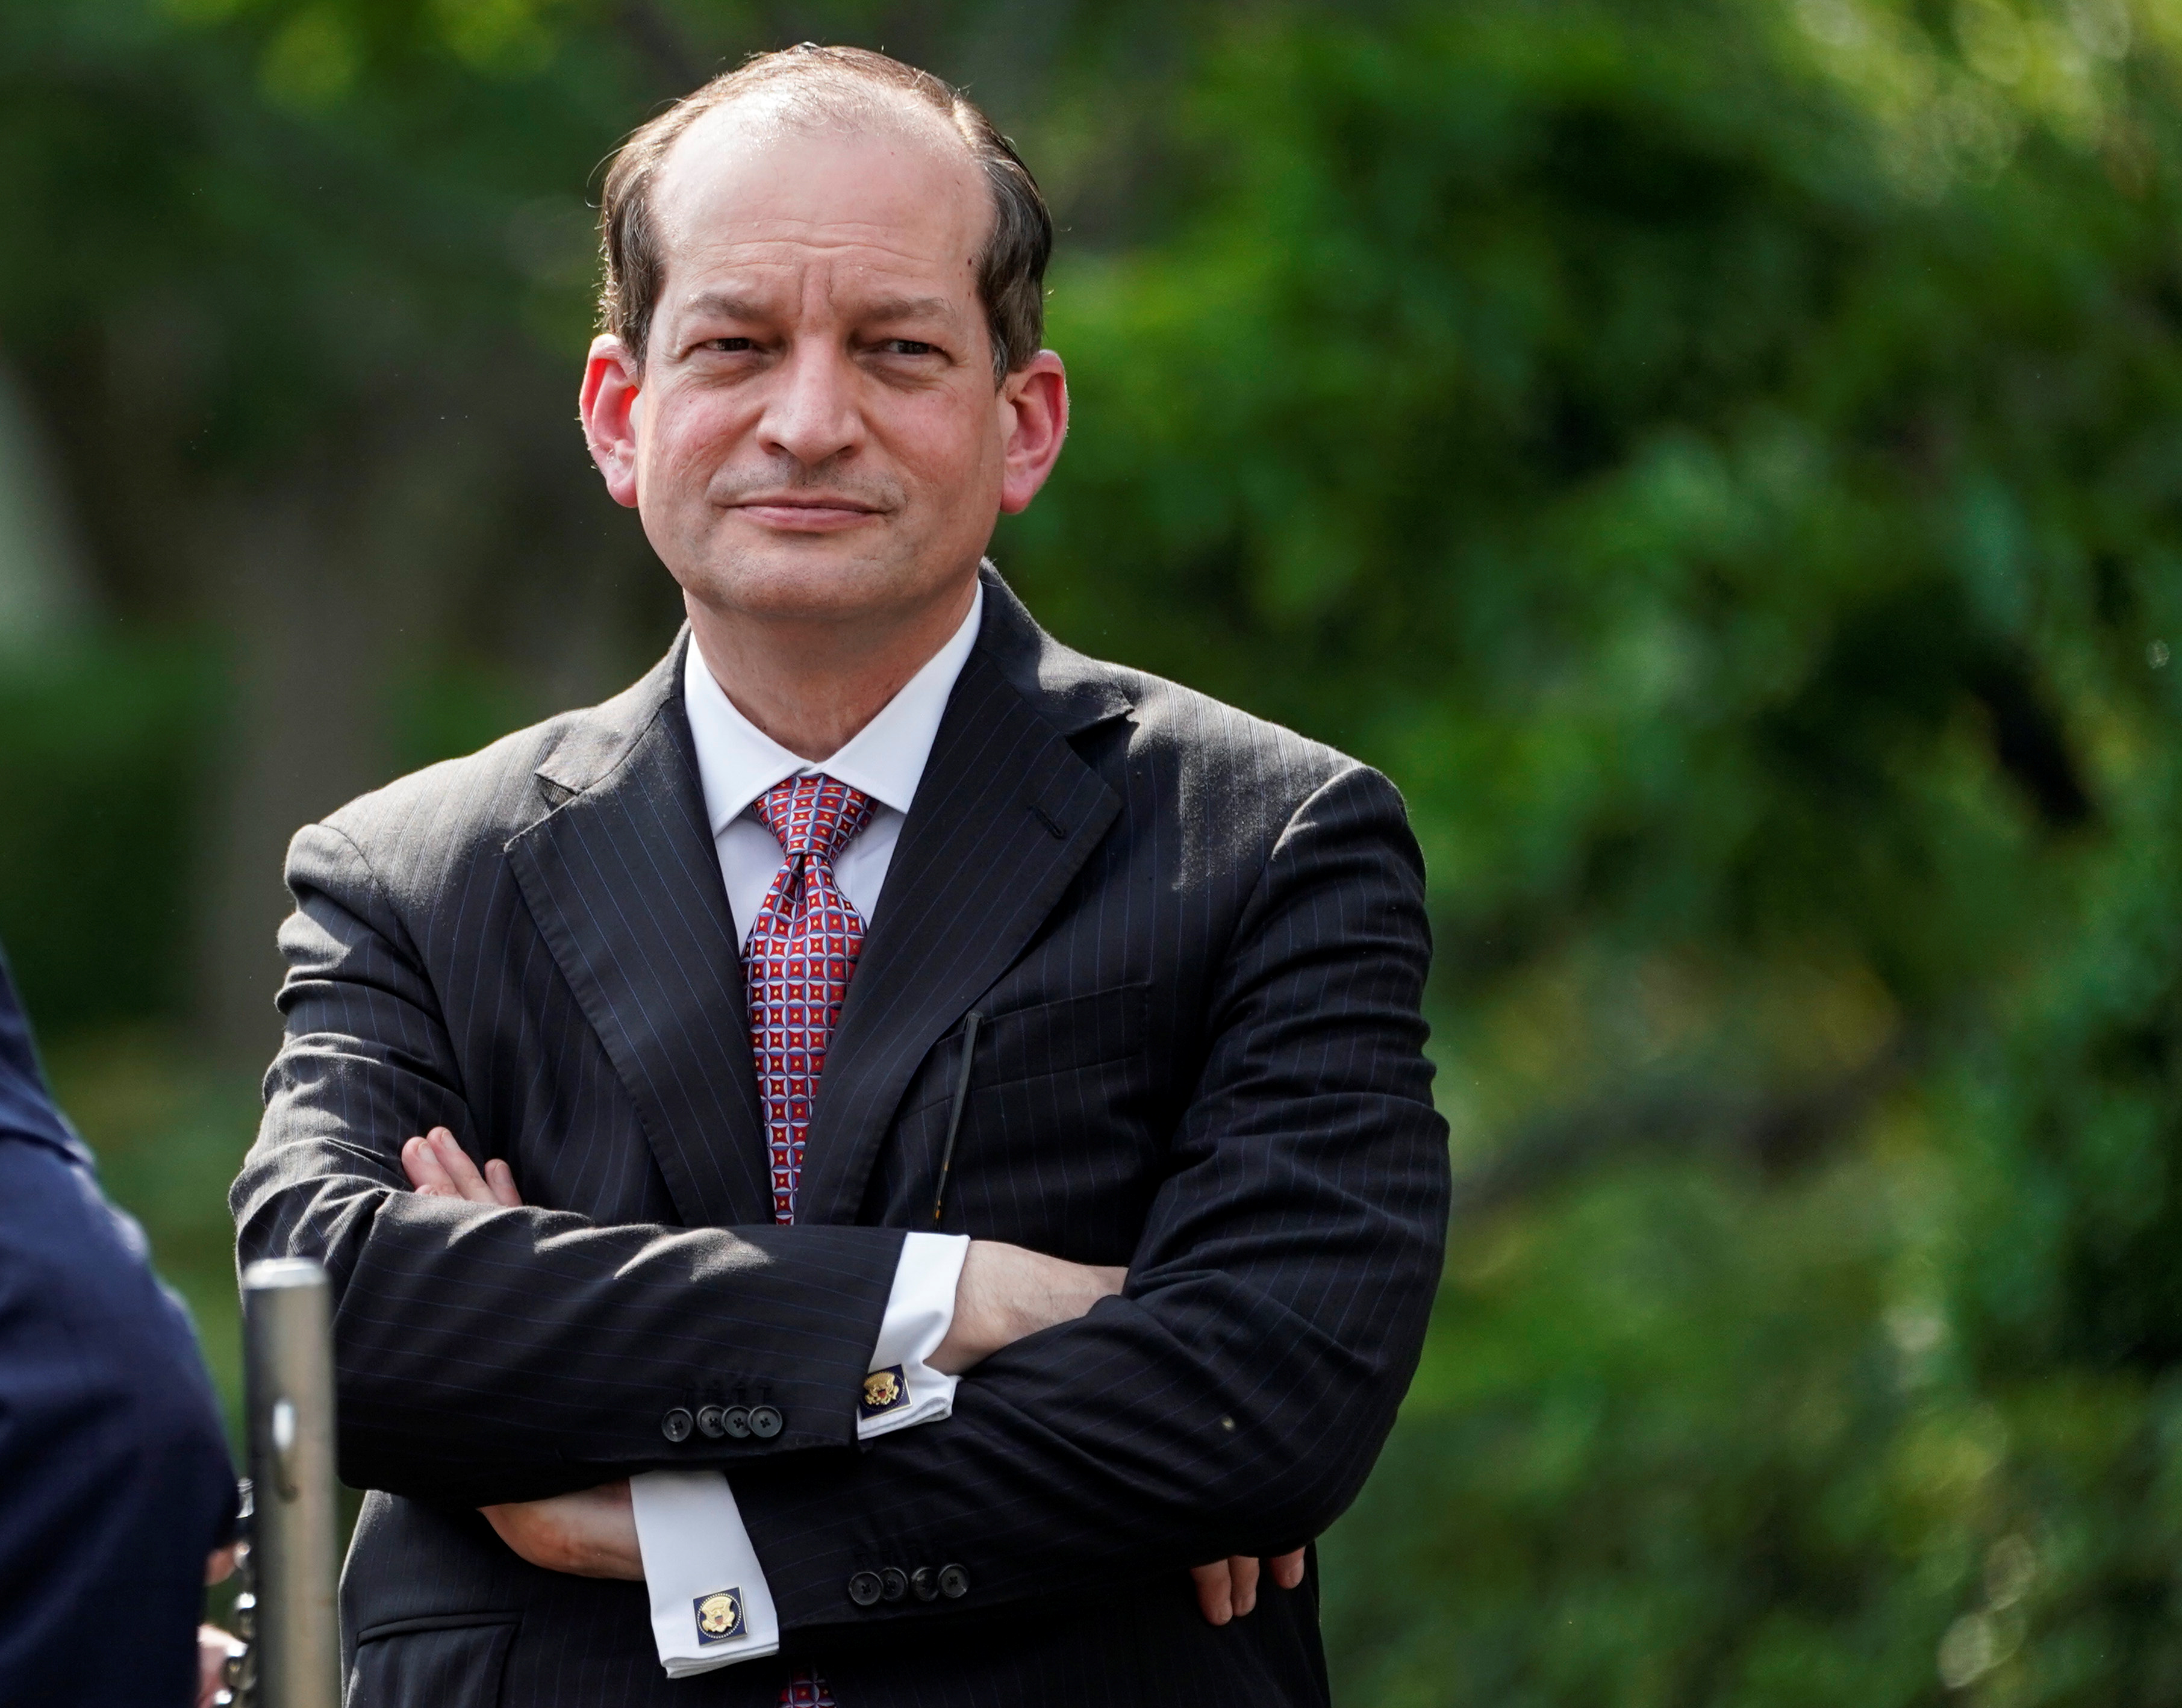 U.S. Secretary of Labor Alex Acosta is seen after an event honoring 2018 NASCAR Cup Series Champion Joey Logano at the White House in Washington, U.S., April 30, 2019. REUTERS/Joshua Roberts